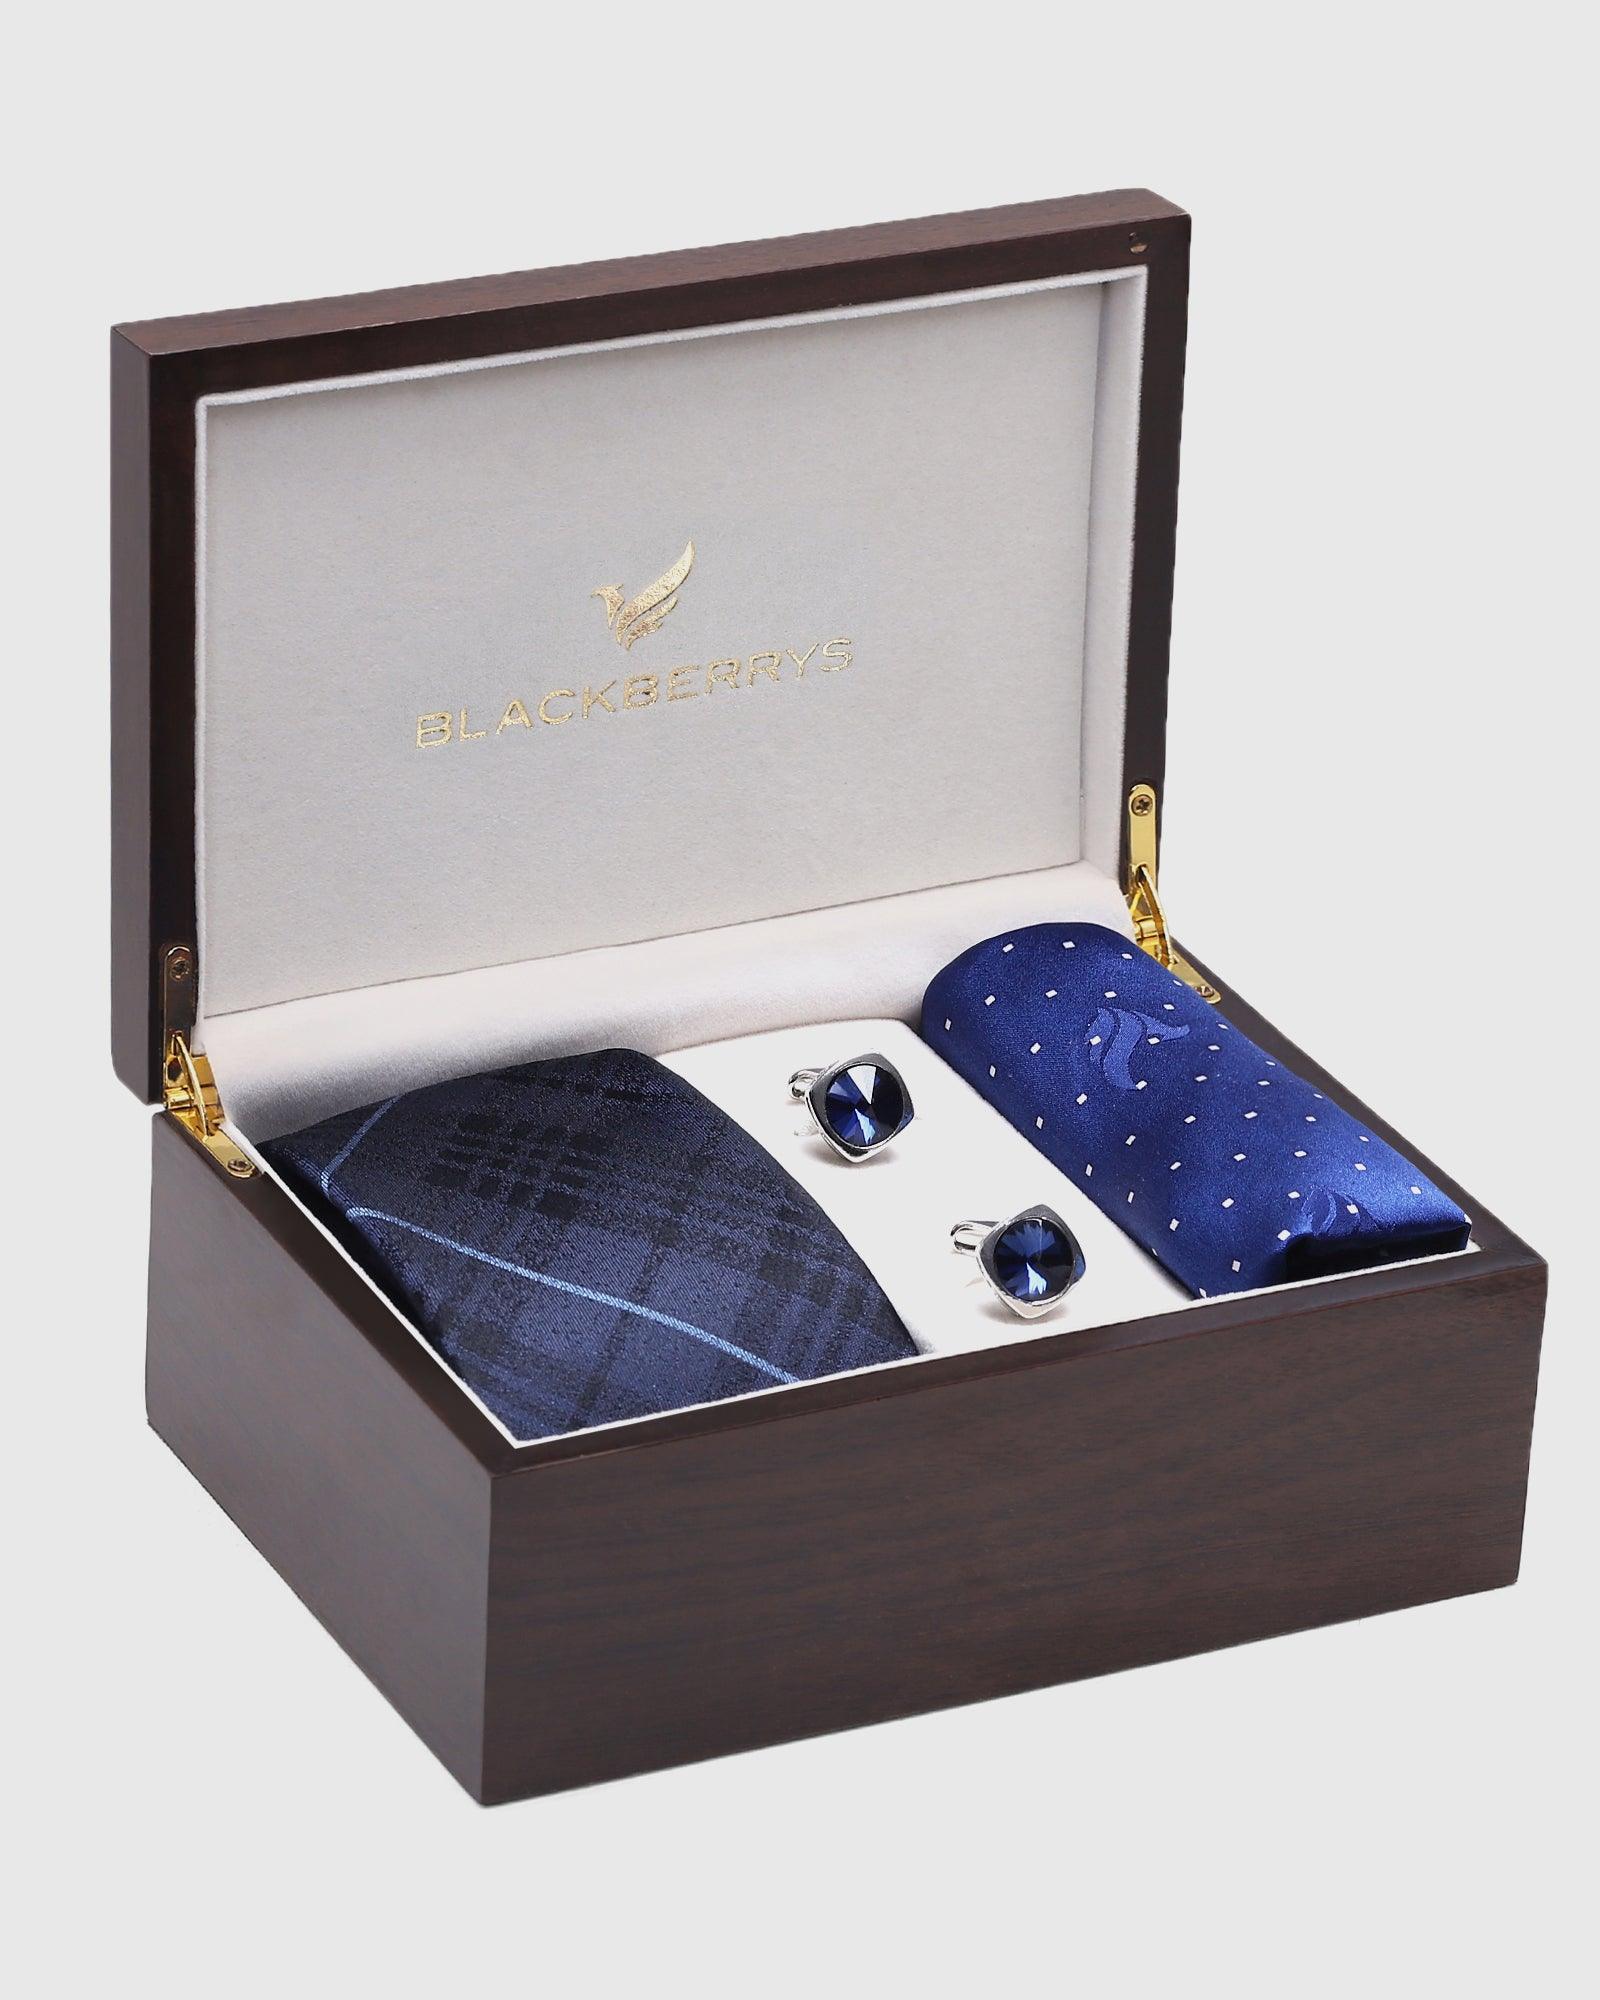 Boxed Combo Check Tie With Pocket Square And Cufflink - Seem